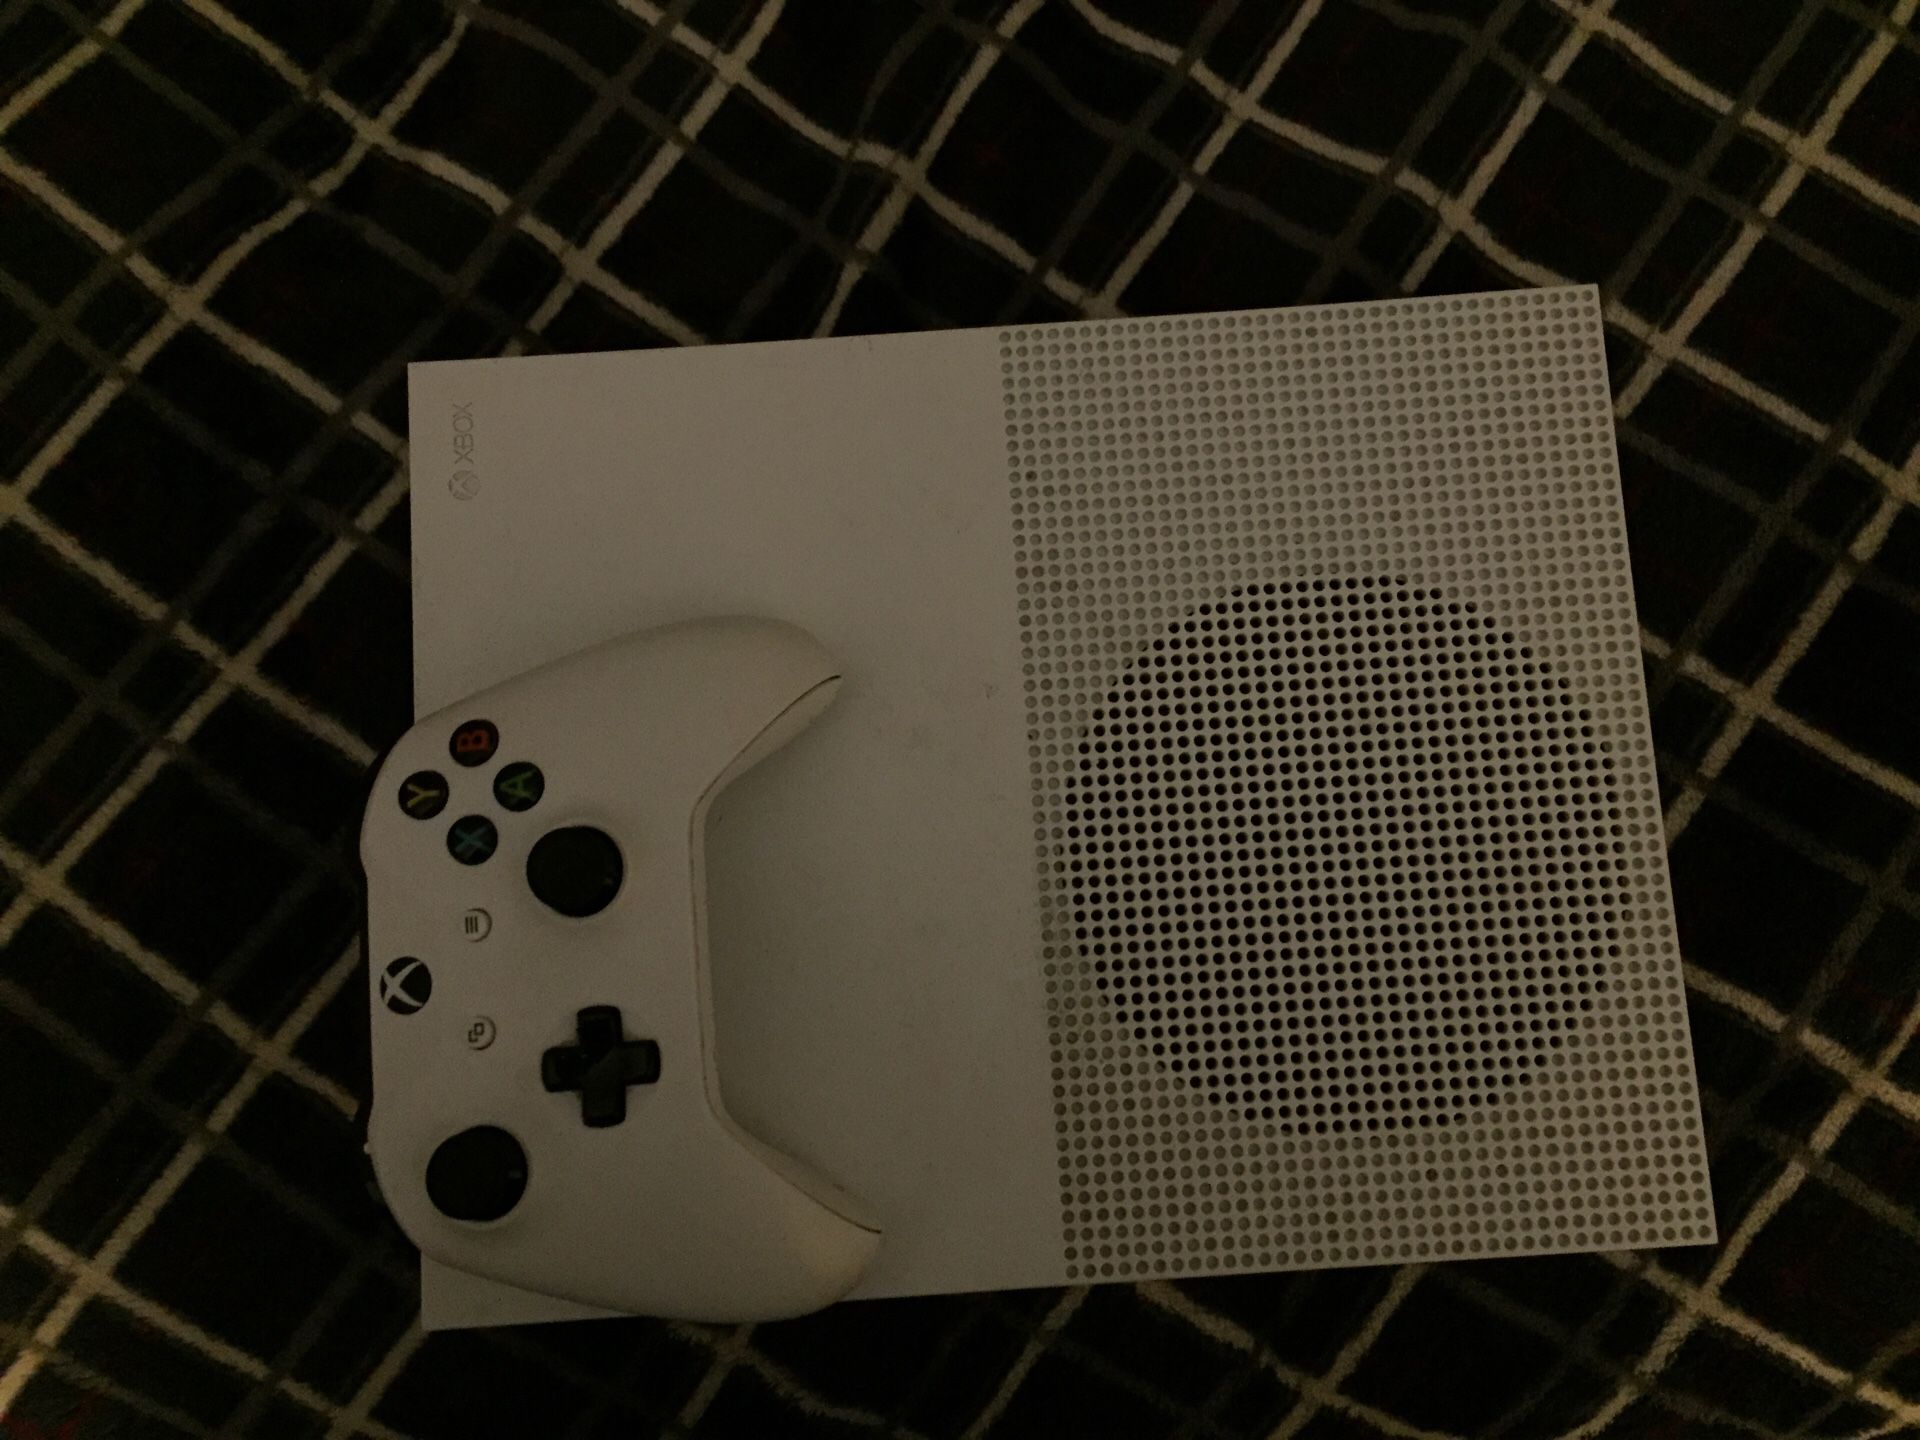 Xbox One S + 1 Controller + the HDMI cord and the plug cord